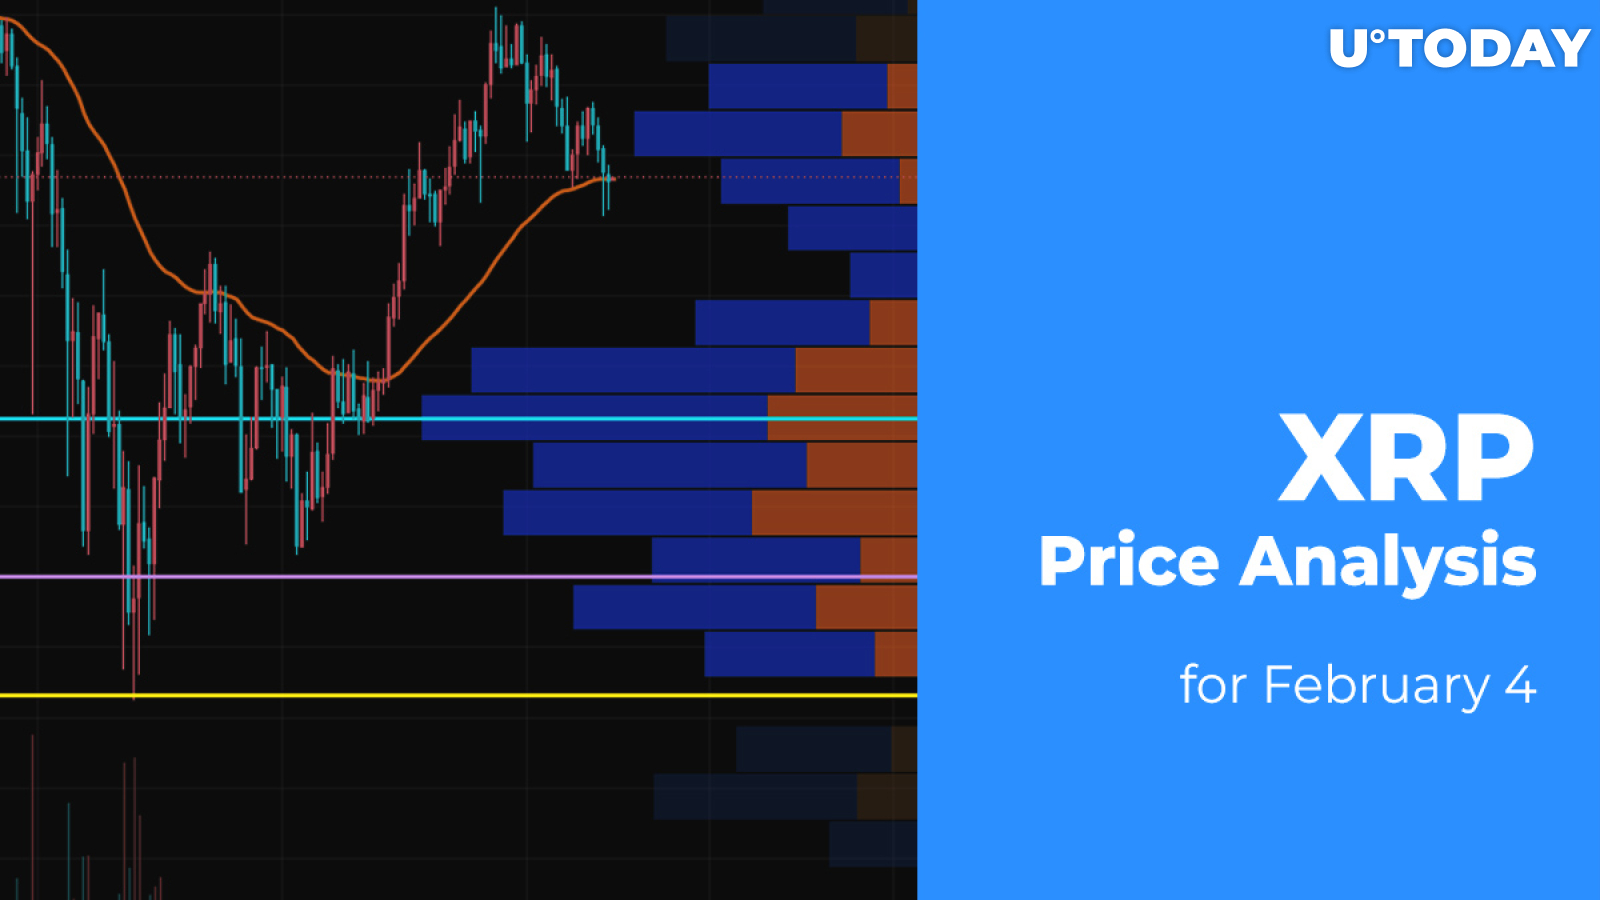 XRP Price Analysis for February 4